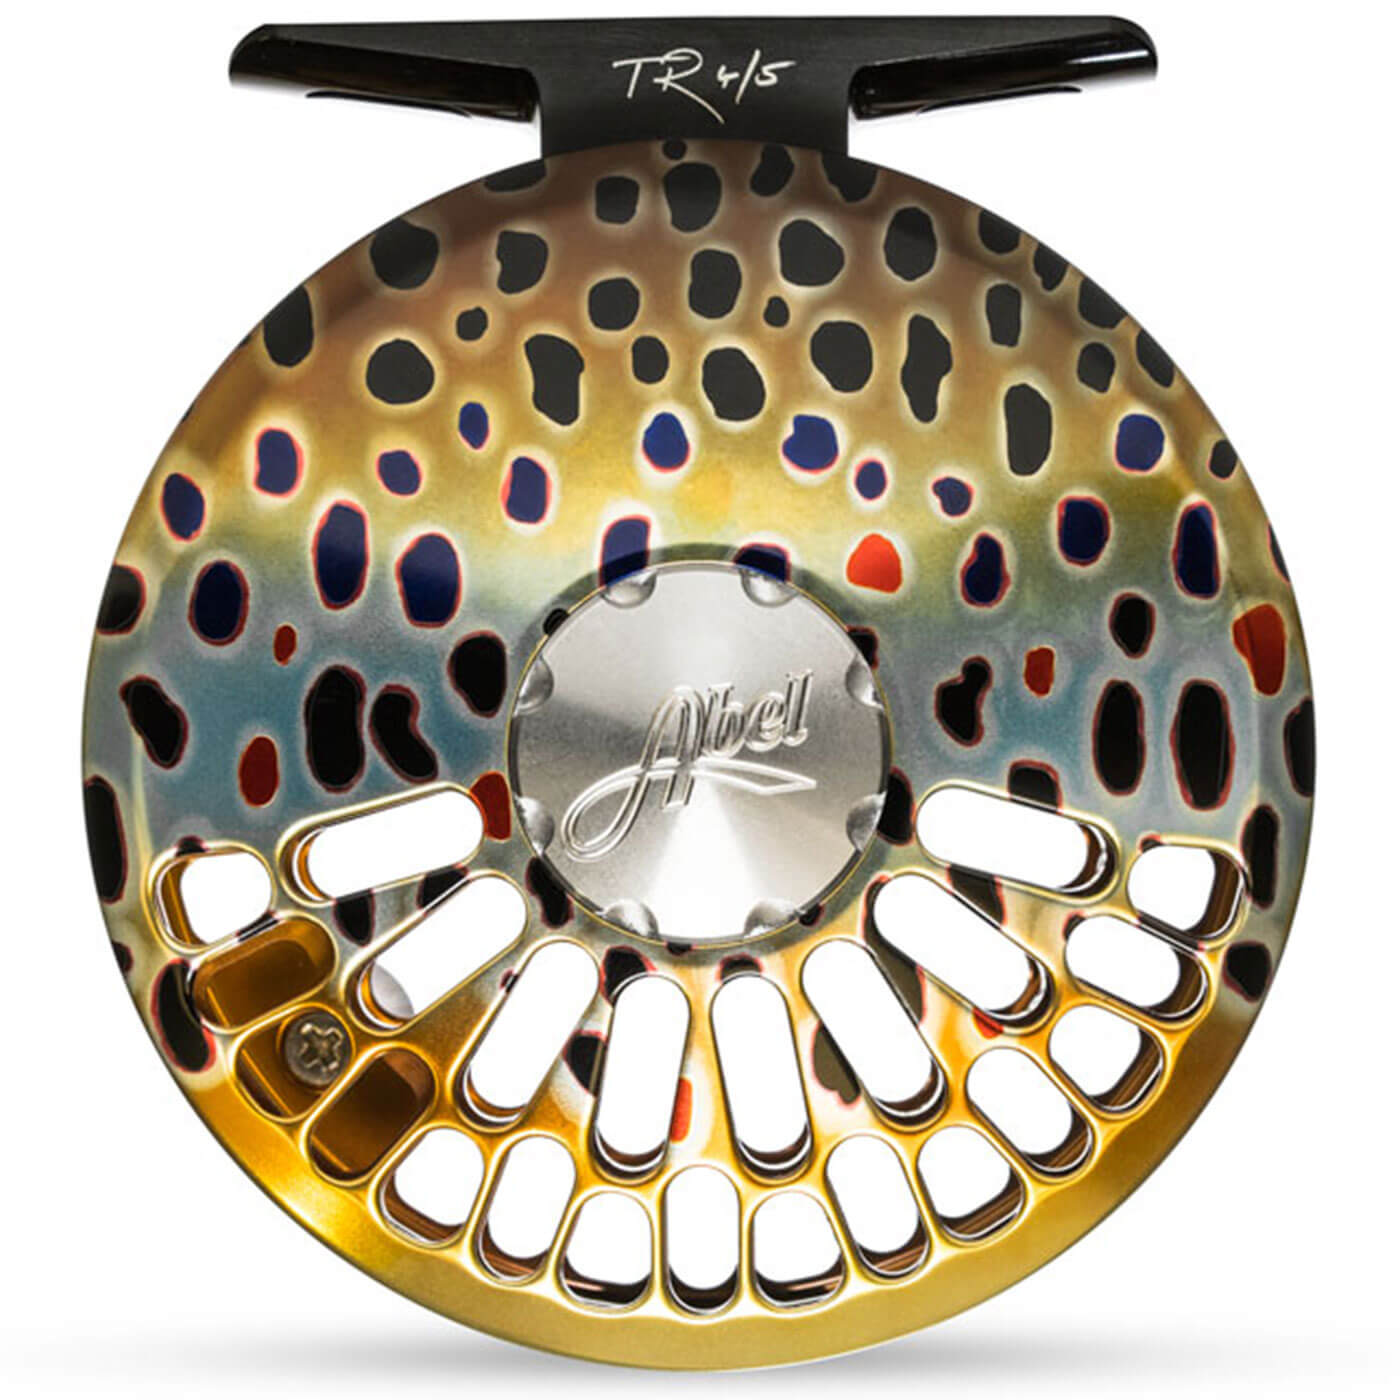 NEW ABEL TR 4/5 CLICK DRAG #4/5 WEIGHT FLY REEL IN GRASS GREEN W/ ZEBRA HANDLE 